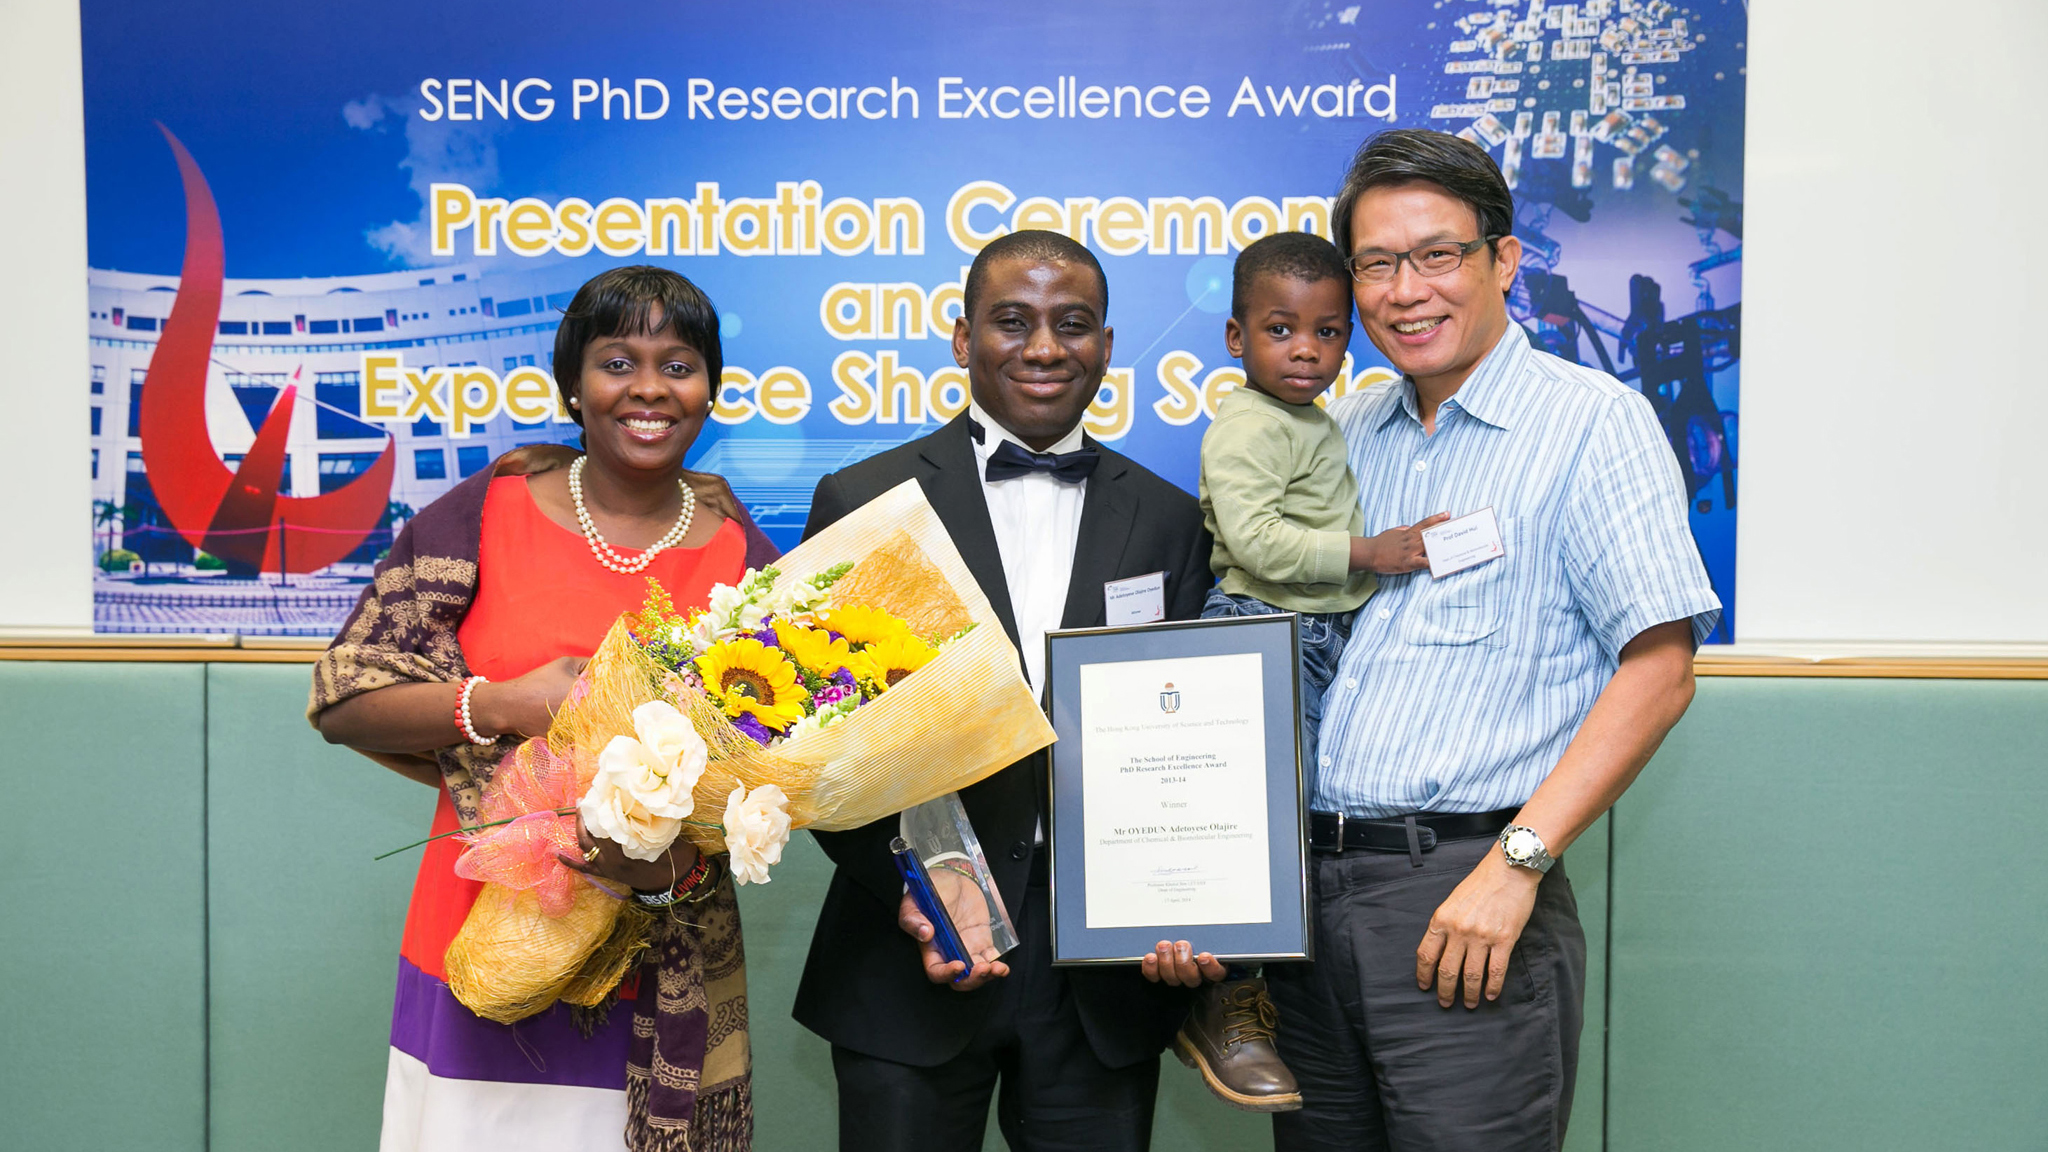 Ade poses for a photo with his beloved family and his supervisor Prof. David HUI (right) at the 2014 HKUST School of Engineering PhD Research Excellence Award Ceremony, where he received an award.